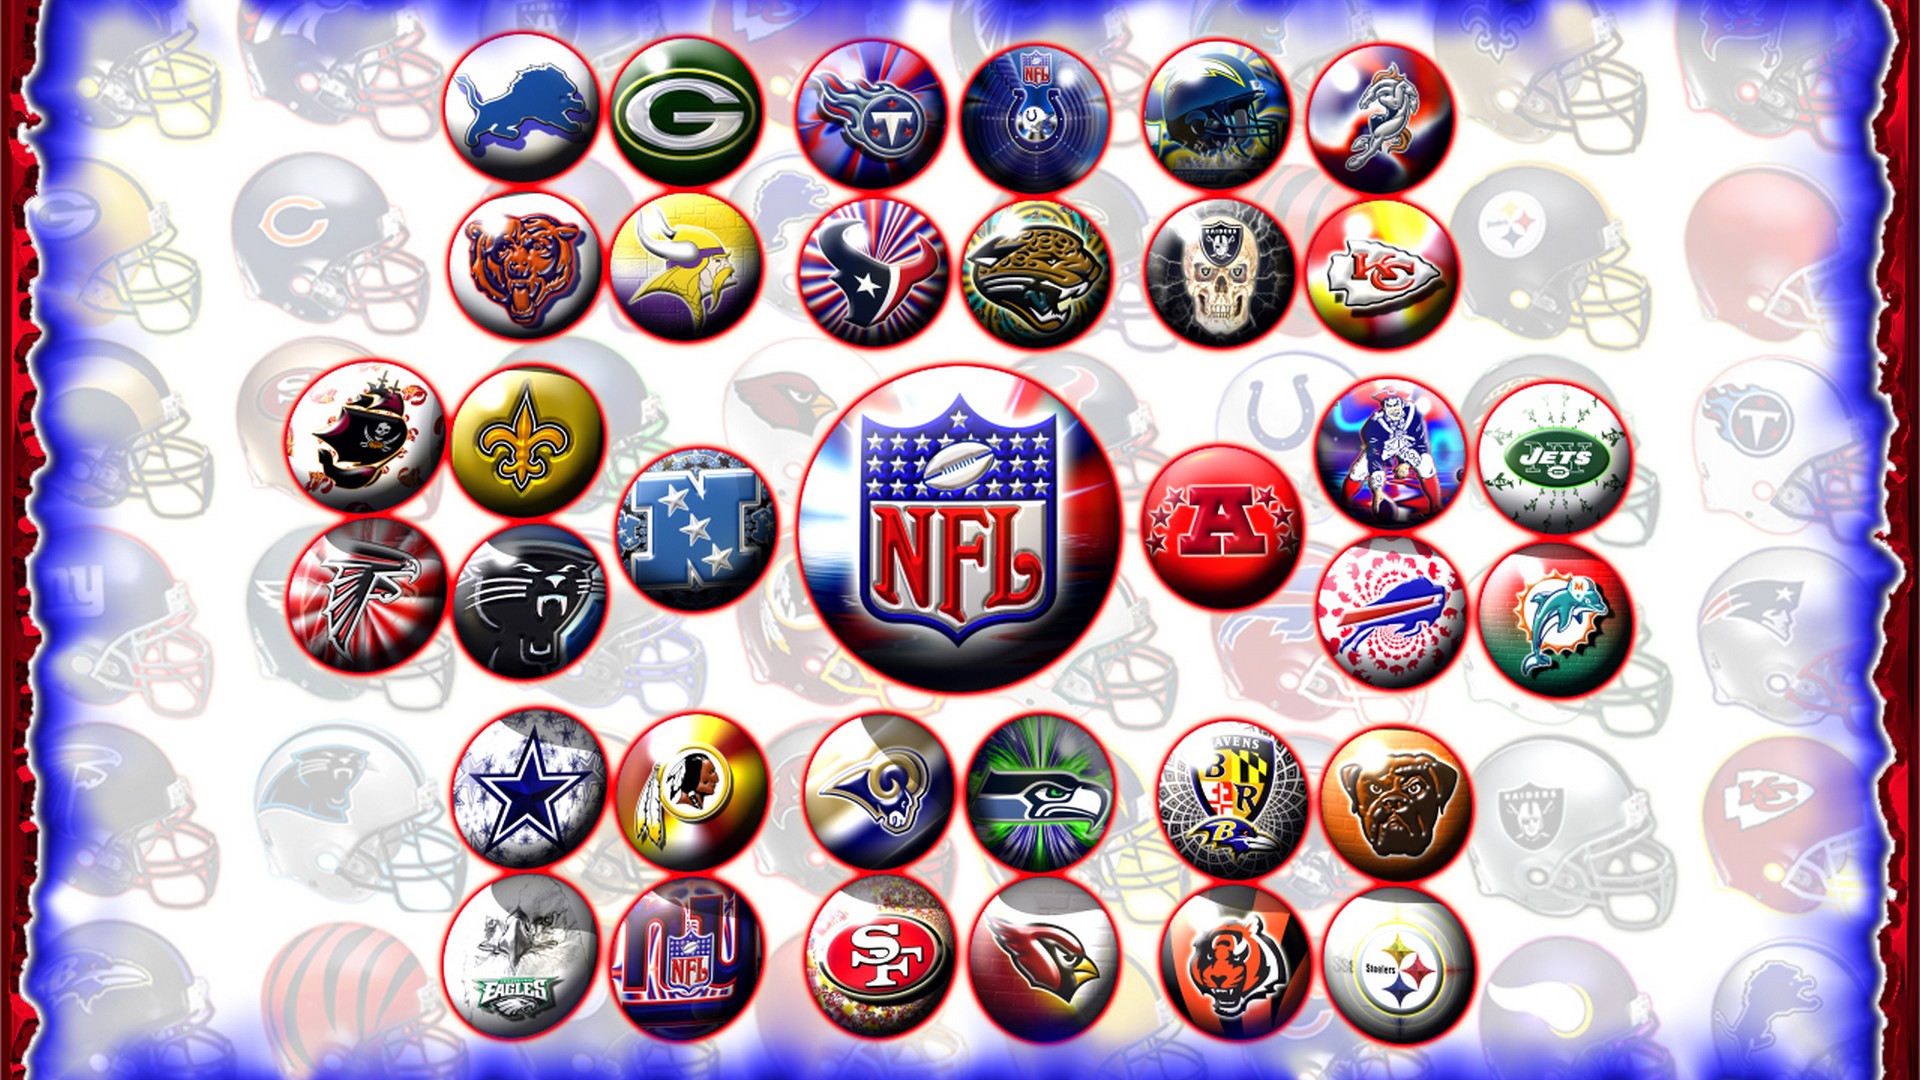 HD NFL Backgrounds With Resolution 1920X1080